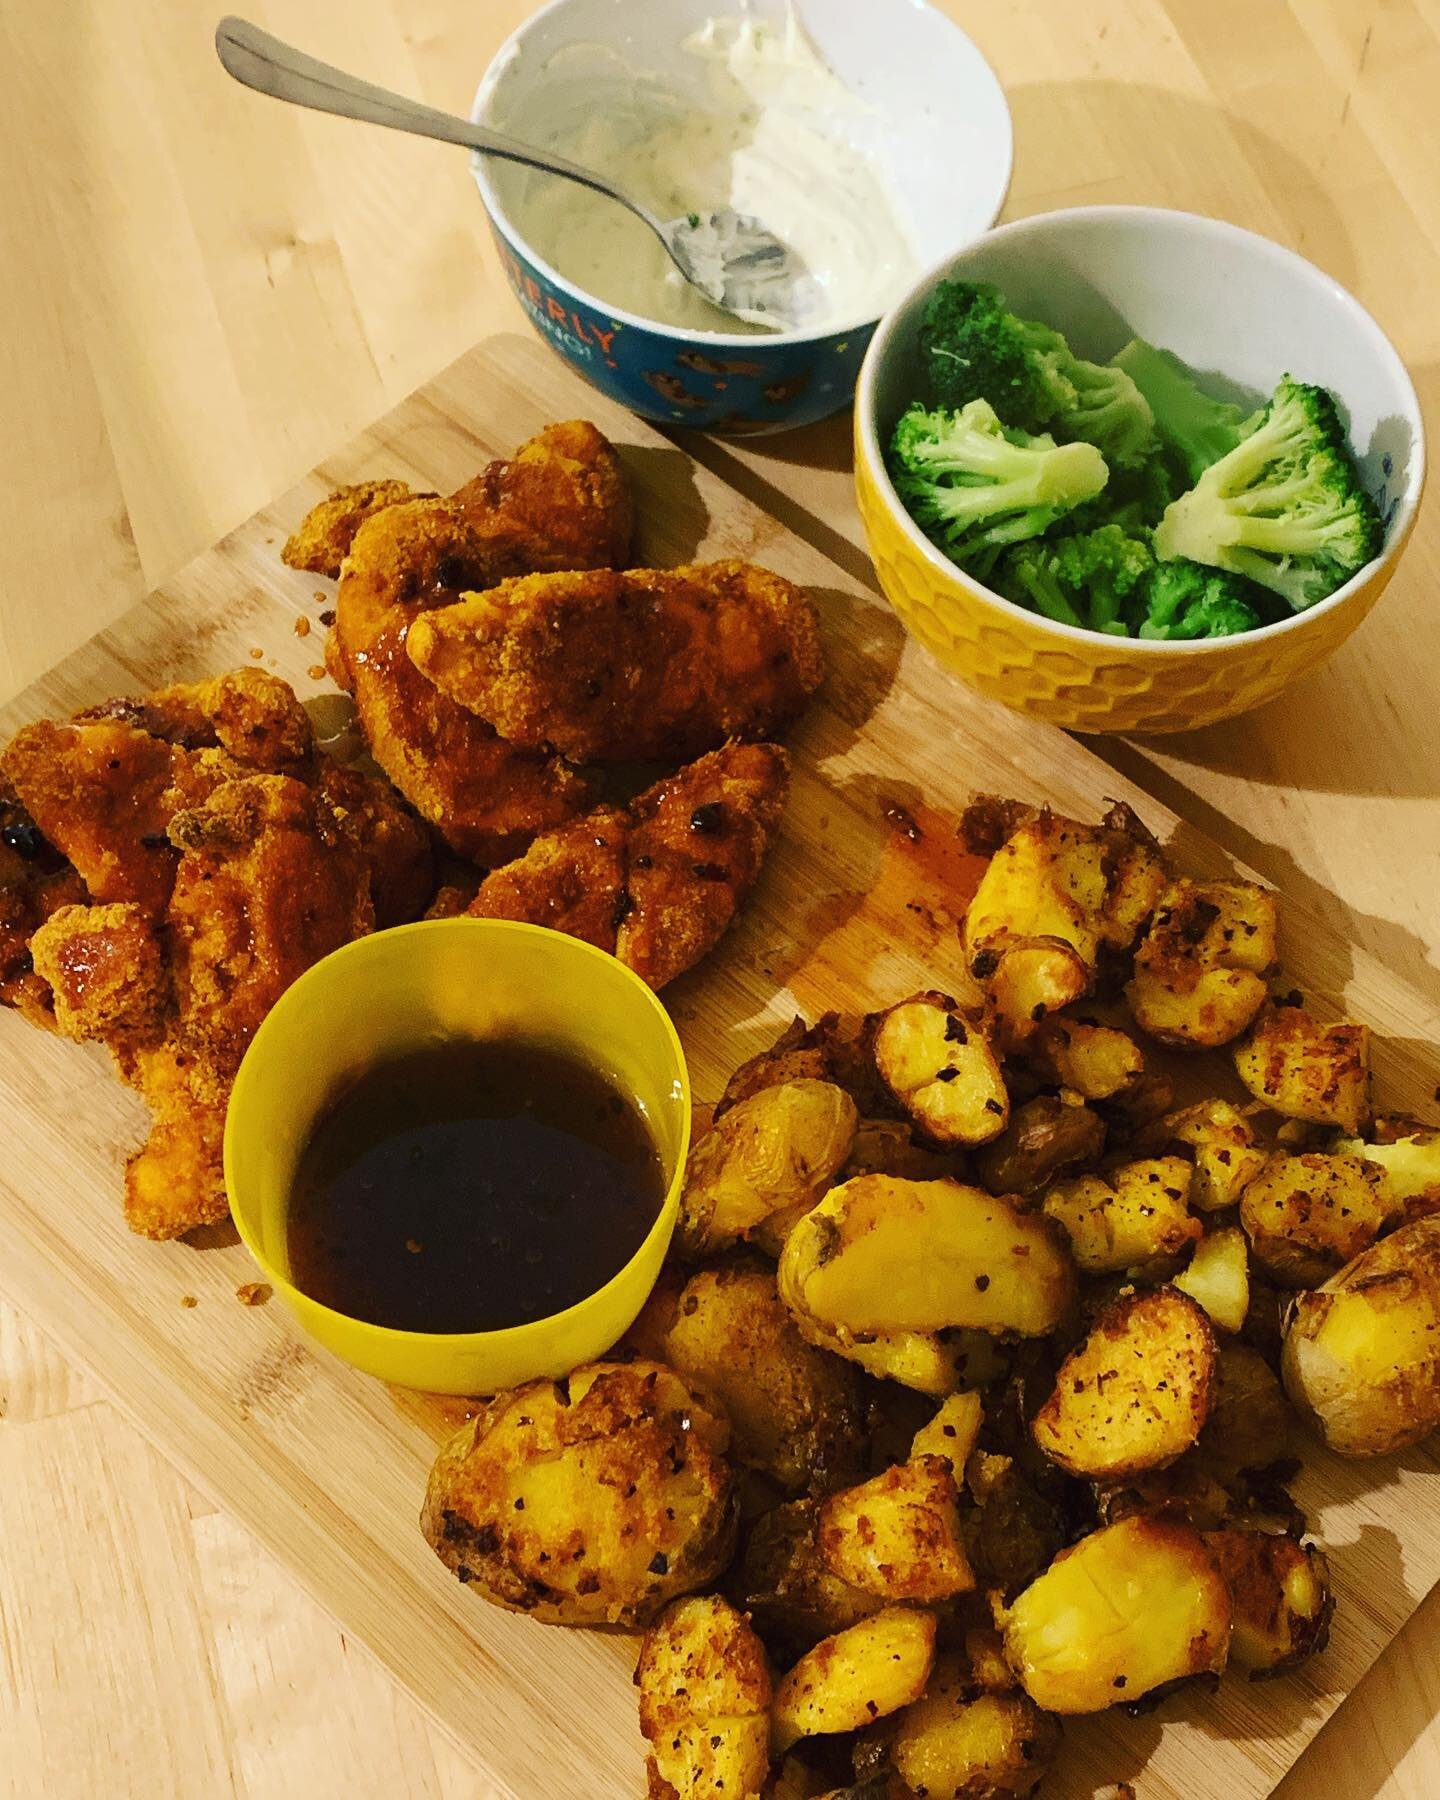 Hot honey chicken with smashed chilli potatoes and a chilli honey sauce.

Cooking really distracts me from chronic pain and helps me feel like I&rsquo;ve achieved something.

Sometimes it makes my pain worse the next day but having something else to 